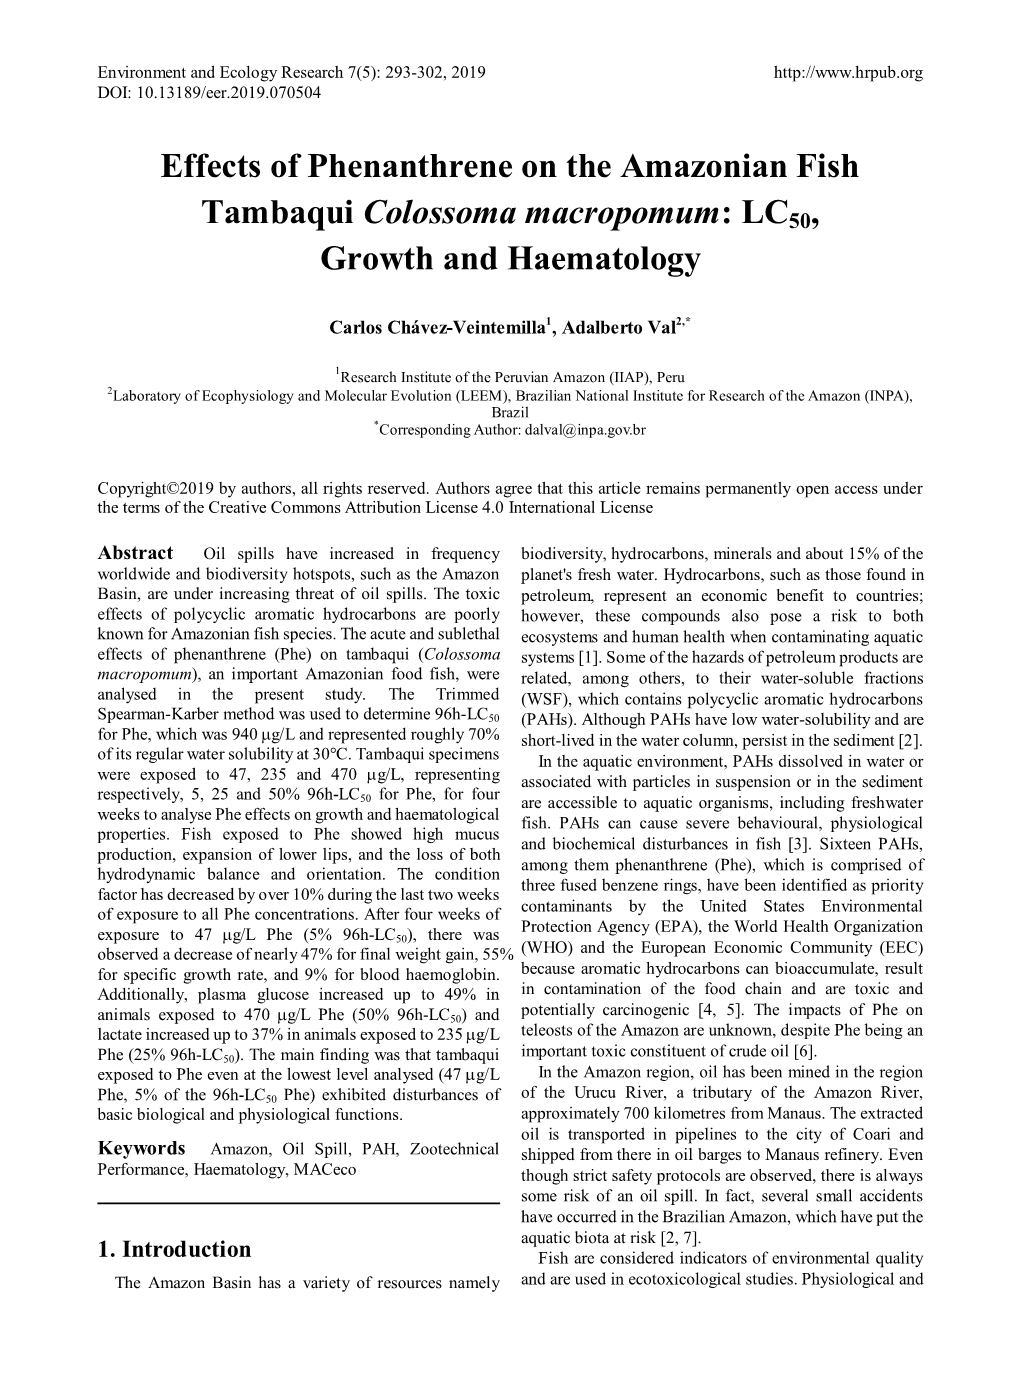 Effects of Phenanthrene on the Amazonian Fish Tambaqui Colossoma Macropomum: LC50, Growth and Haematology